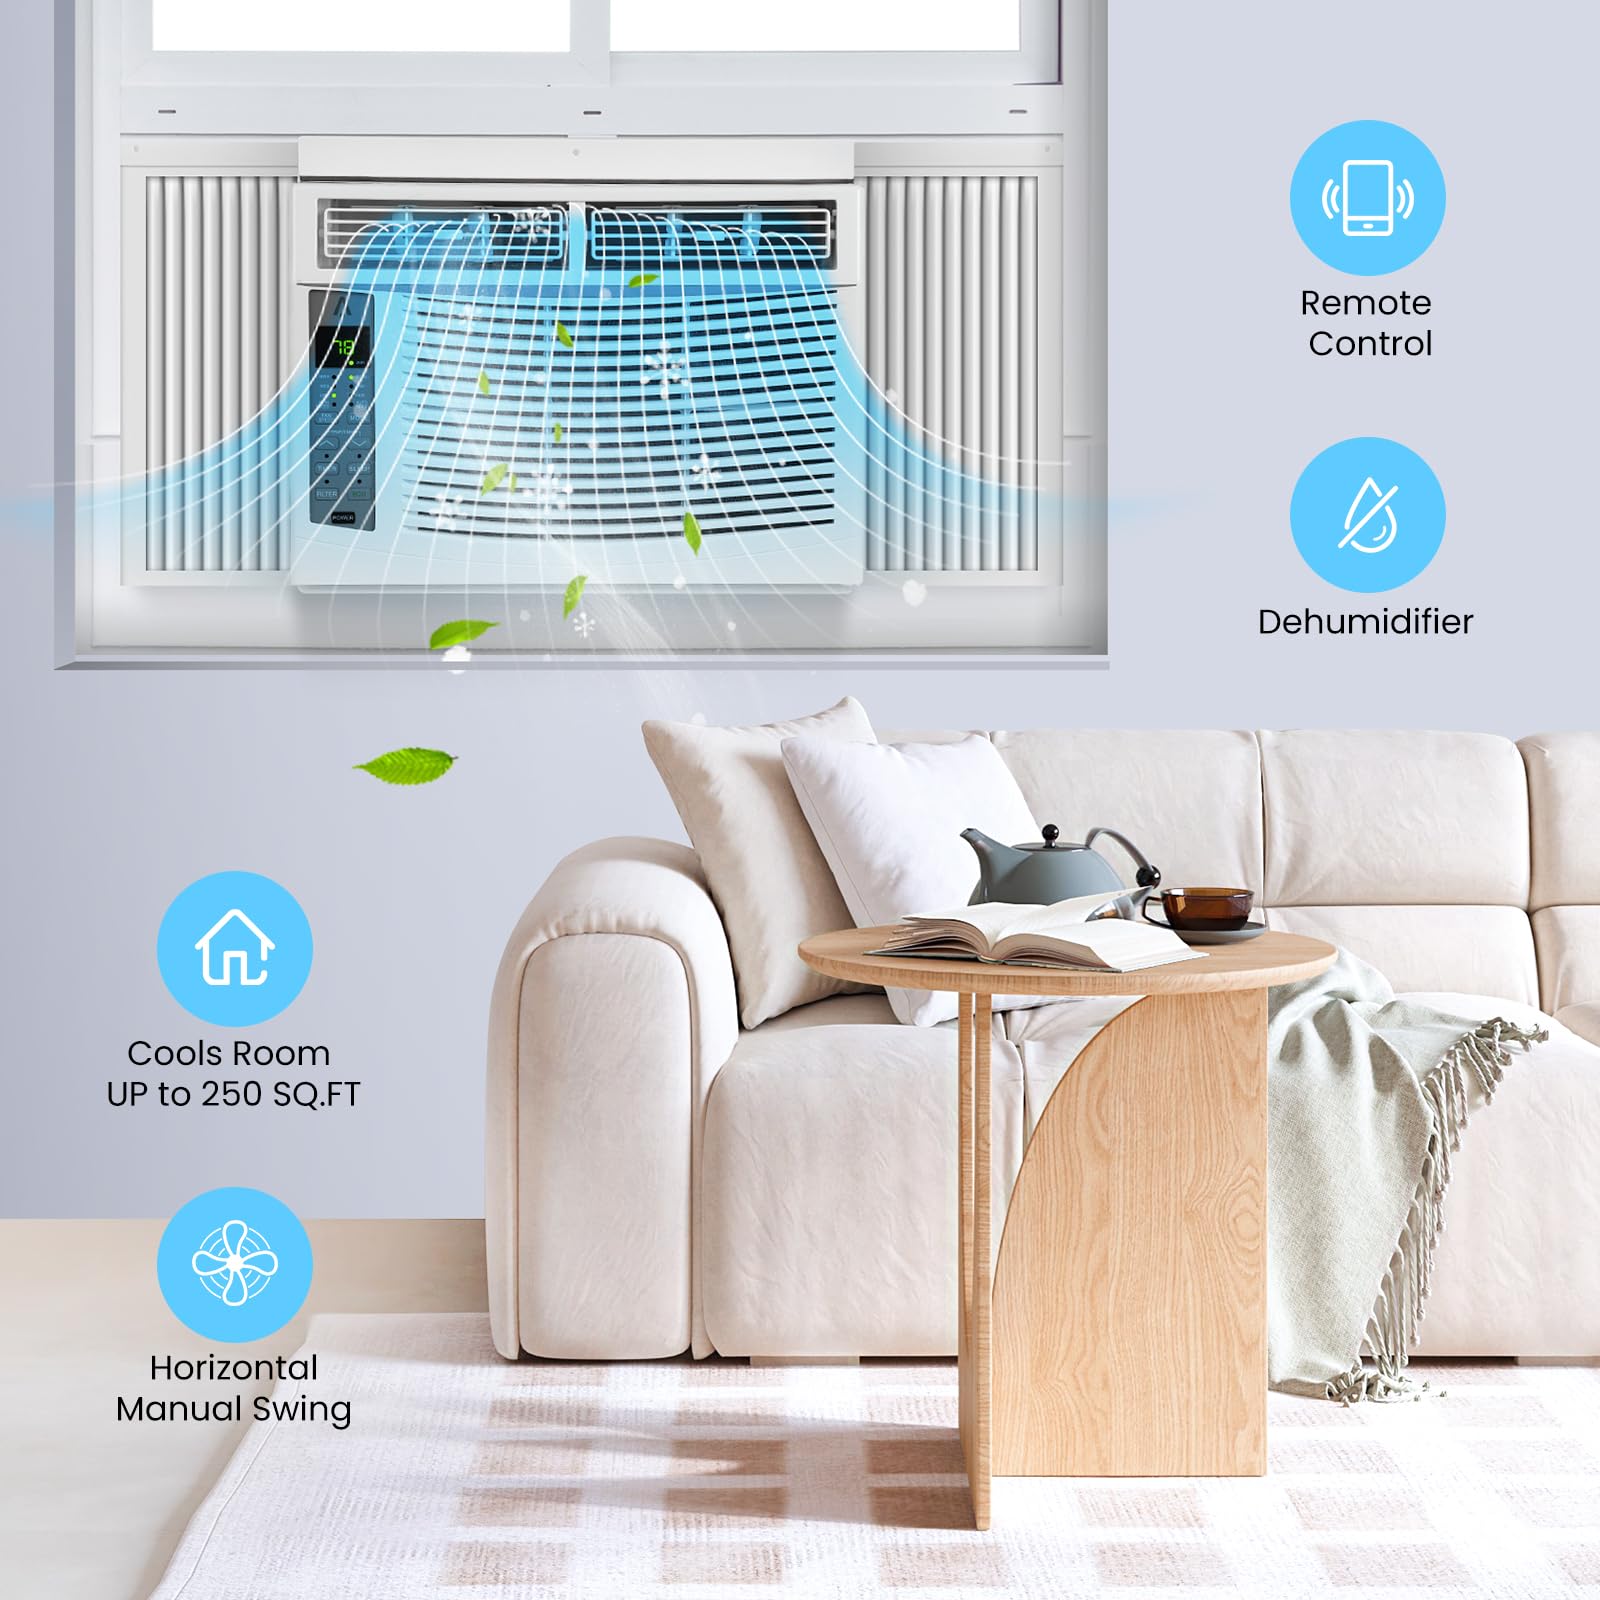 6000btu Window Air Conditioner Units, Fast Cooling 250 Sq.ft. 115V Air Conditioner Window Unit with Remote Controlled, App Controlled, 50db Low Noise,Small Ac Unit for Room Quick Installation